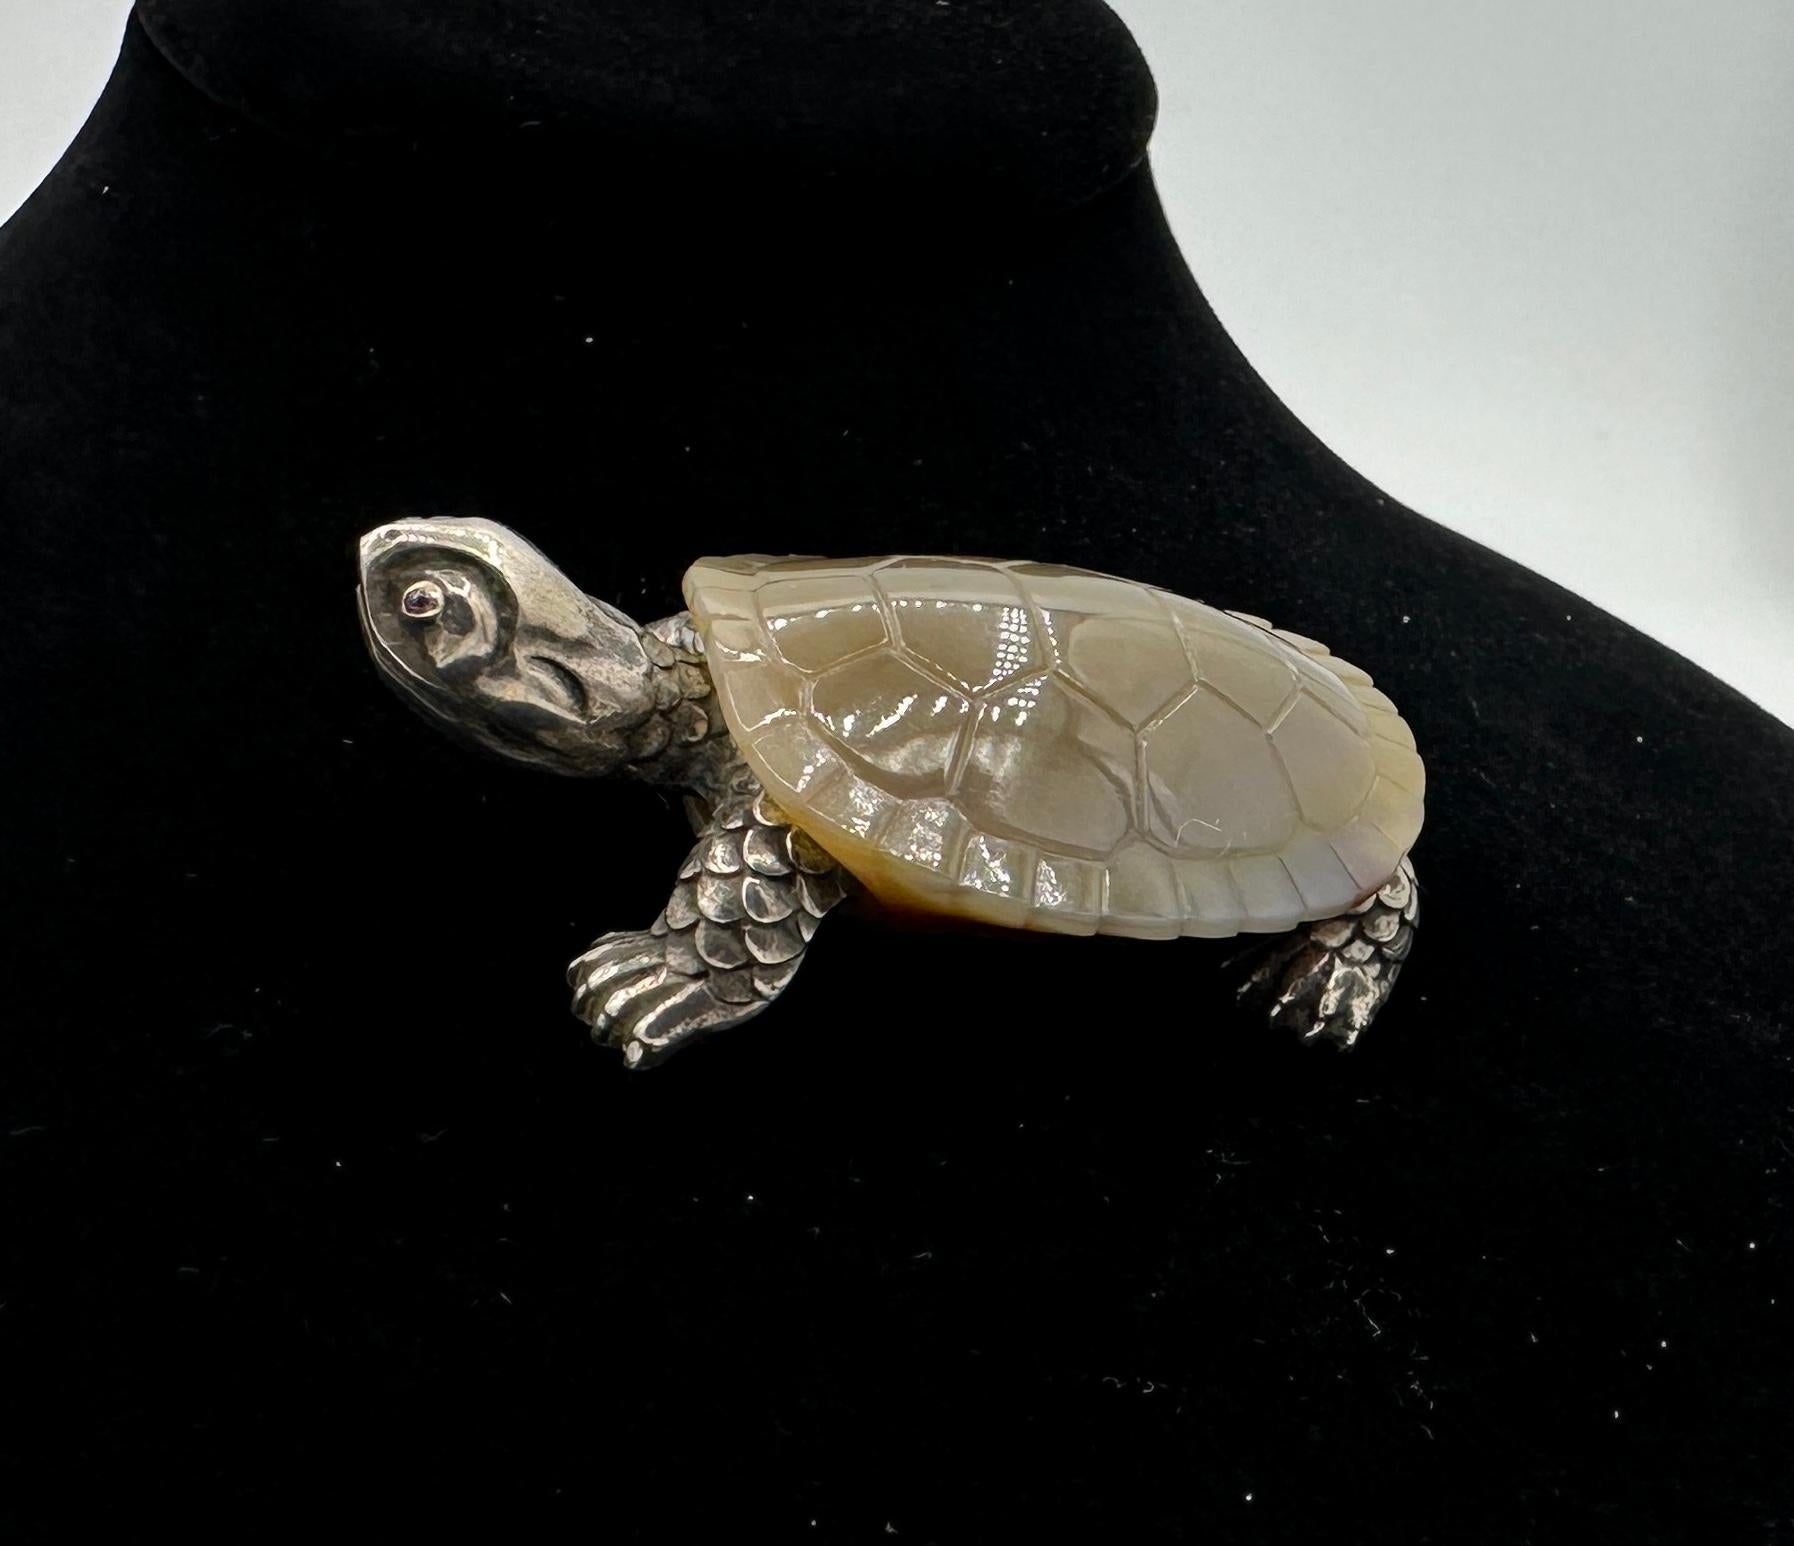 This is a magnificent Faberge Turtle or Tortoise in Silver with Ruby Eyes and a carved Agate Shell signed I.P. for the famed Faberge Workmaster Julius Rappoport.  The spectacular carved and jeweled turtle is a masterwork by Faberge's most famous